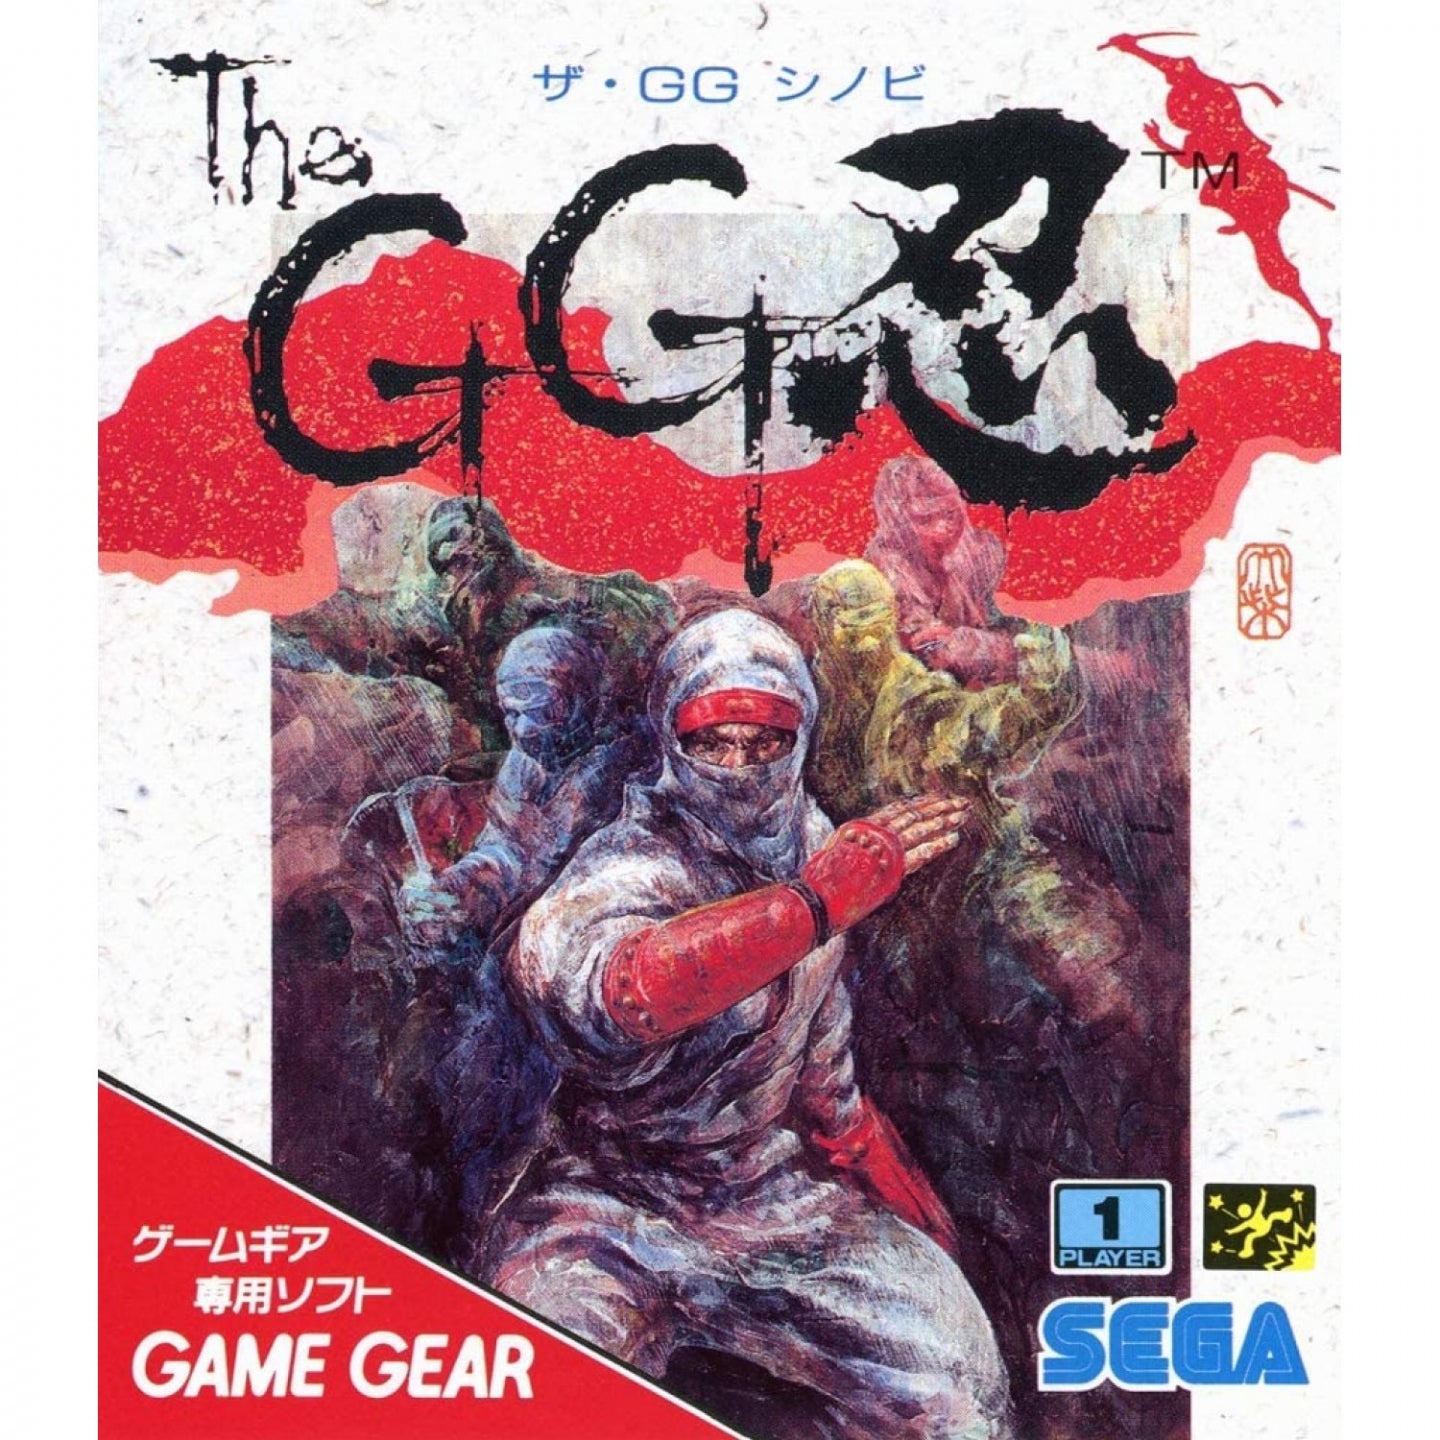 Game Gear Micro Red (Import)